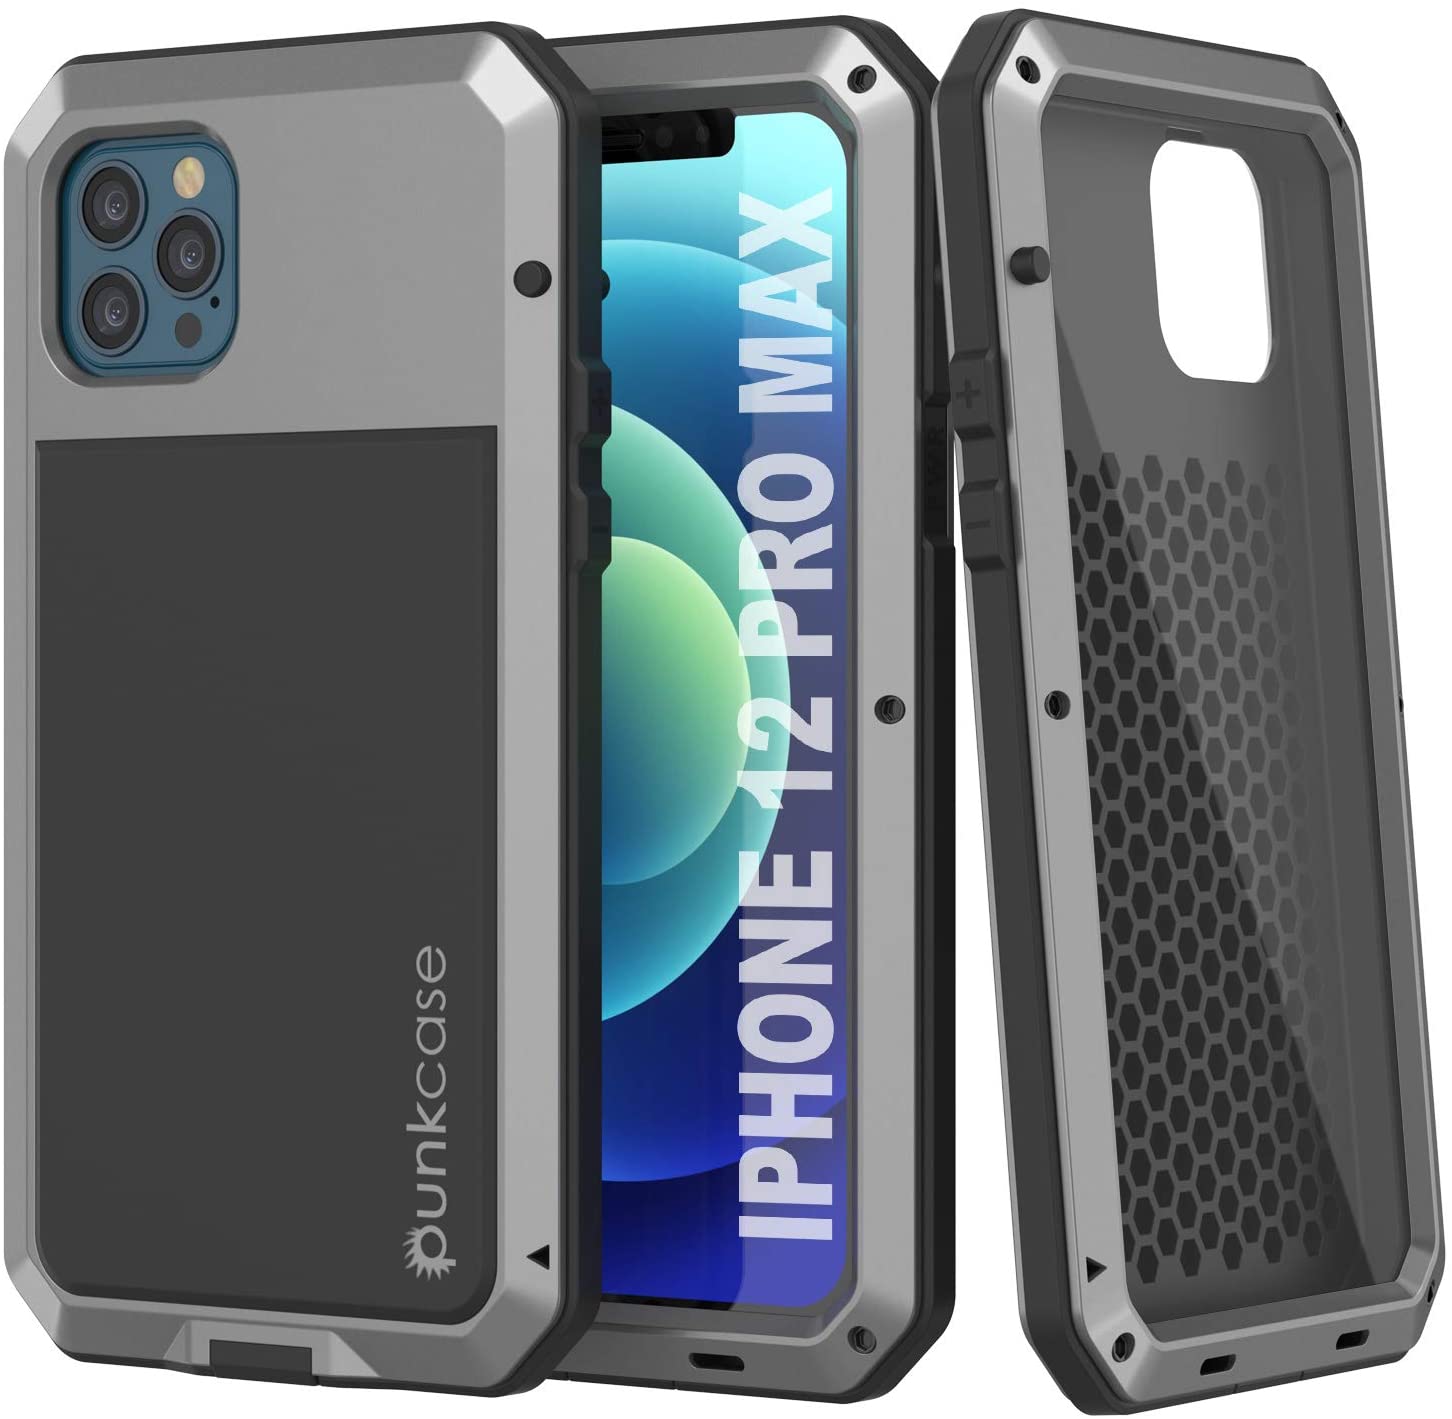 Punkcase for iPhone 12 Pro Max Metal Case, Heavy Duty Military Grade Armor Cover [Shock Proof] Hard Aluminum & TPU Design for iPhone 12 Pro Max (6.7